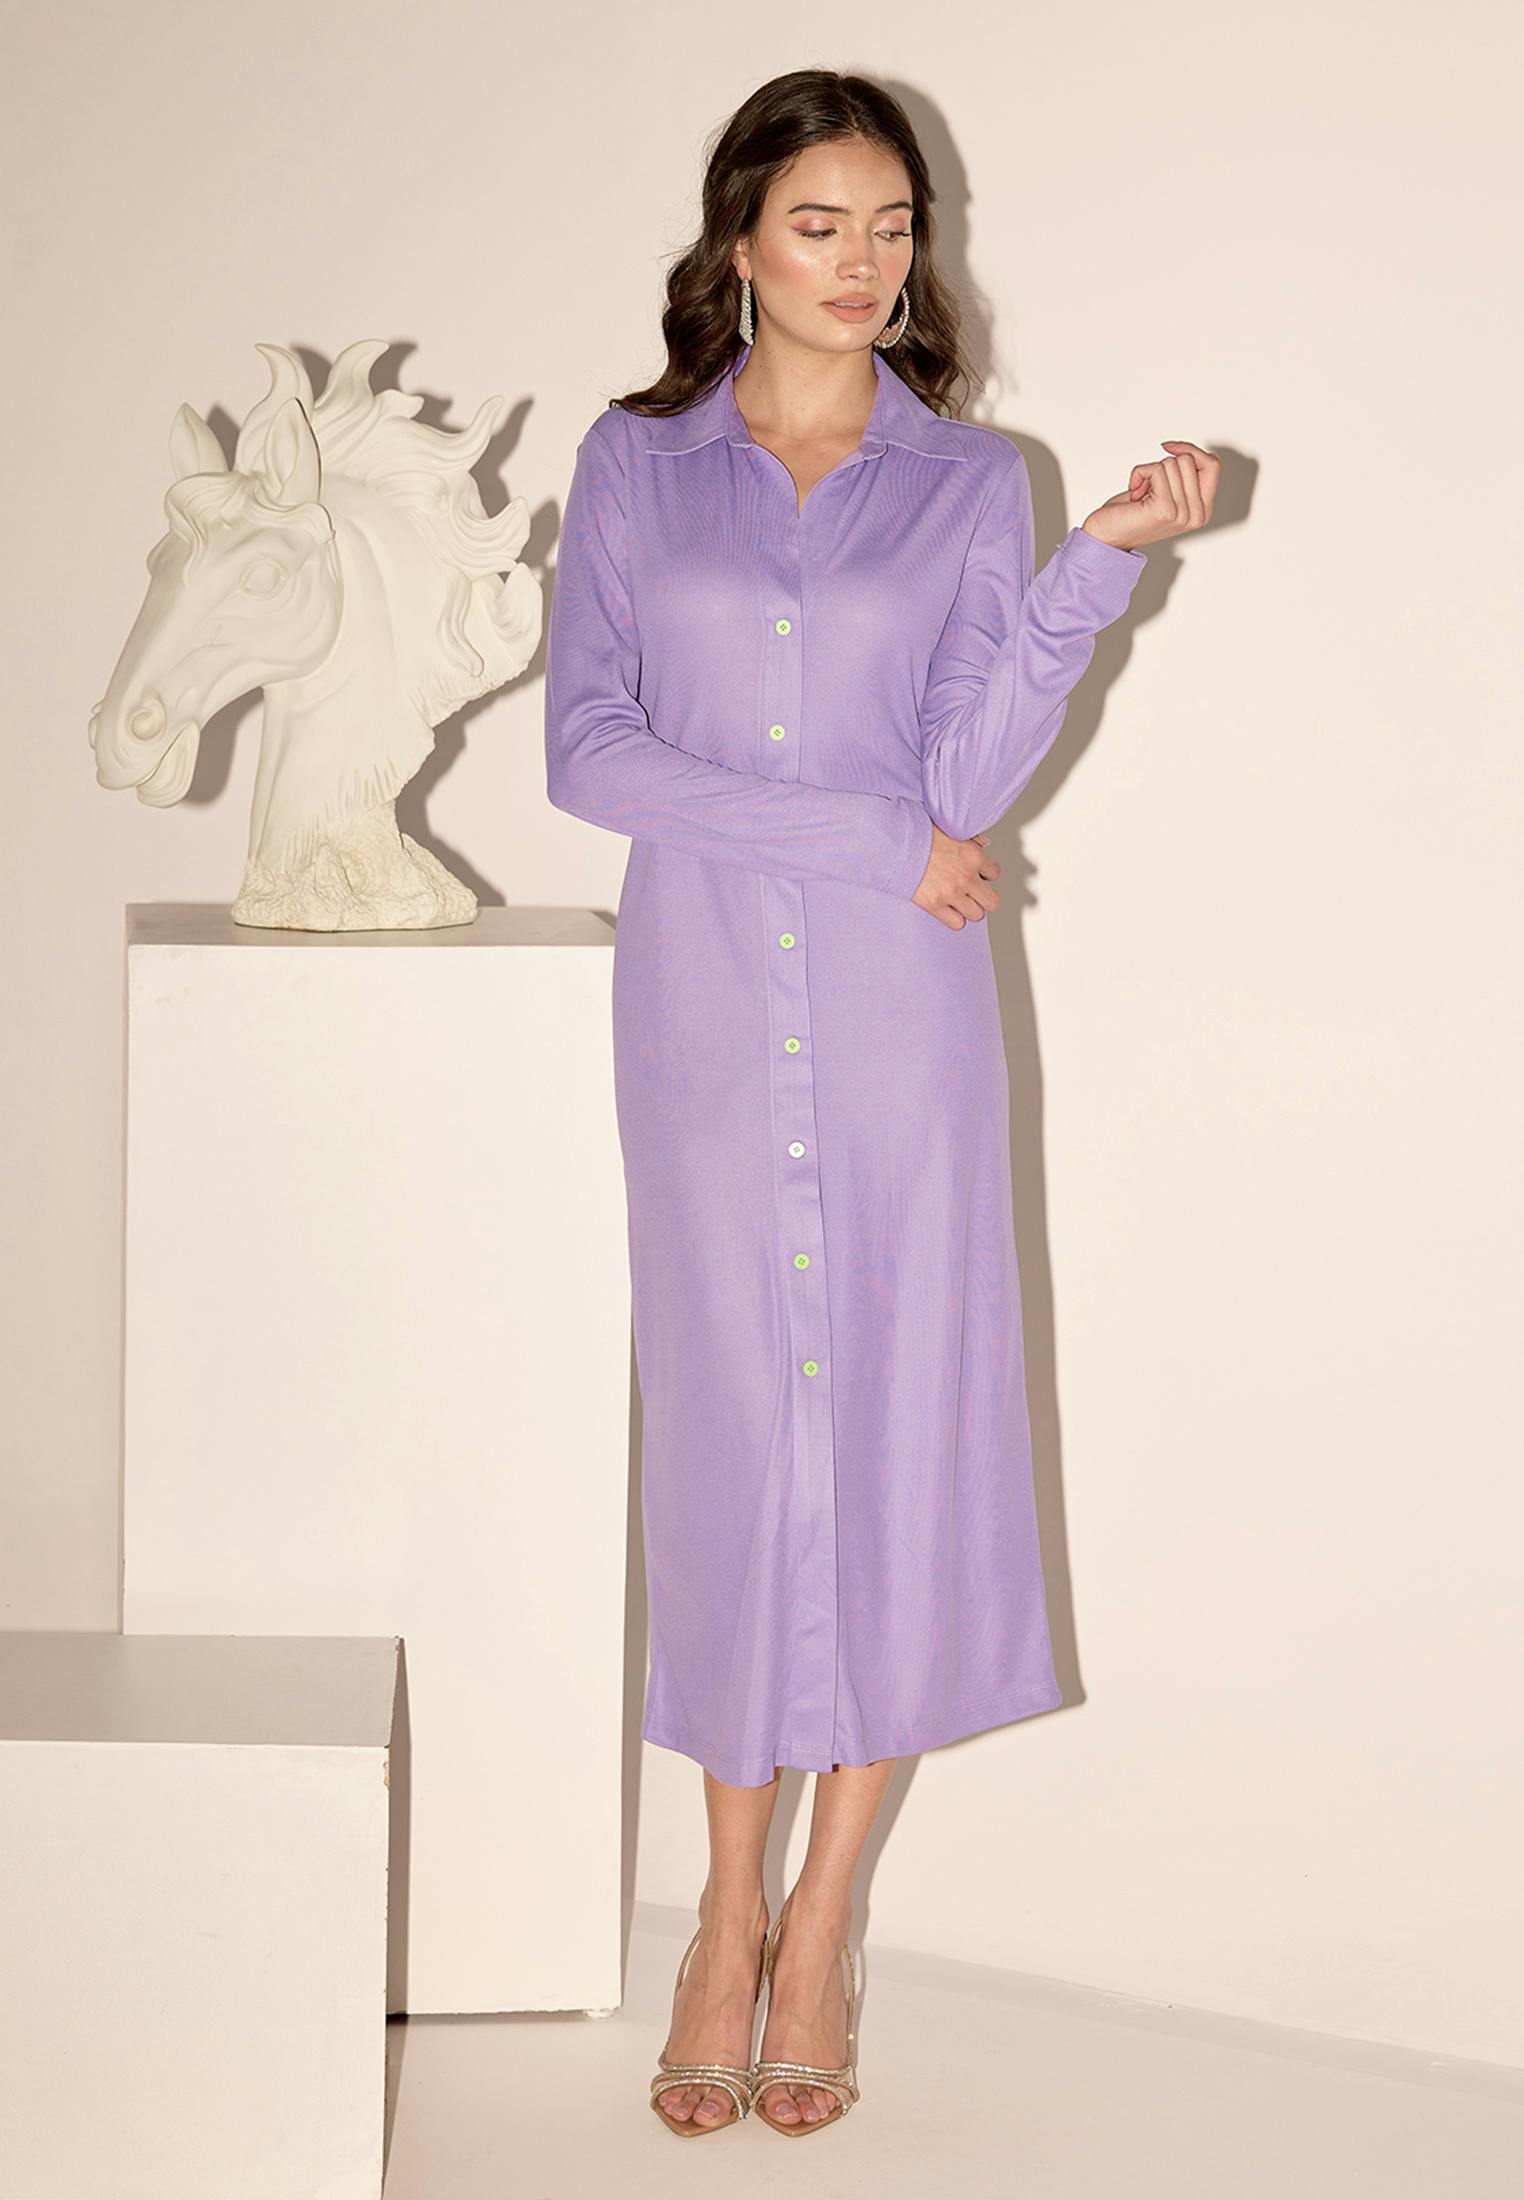 Periwinkle Lounging Dress, a product by Lola's